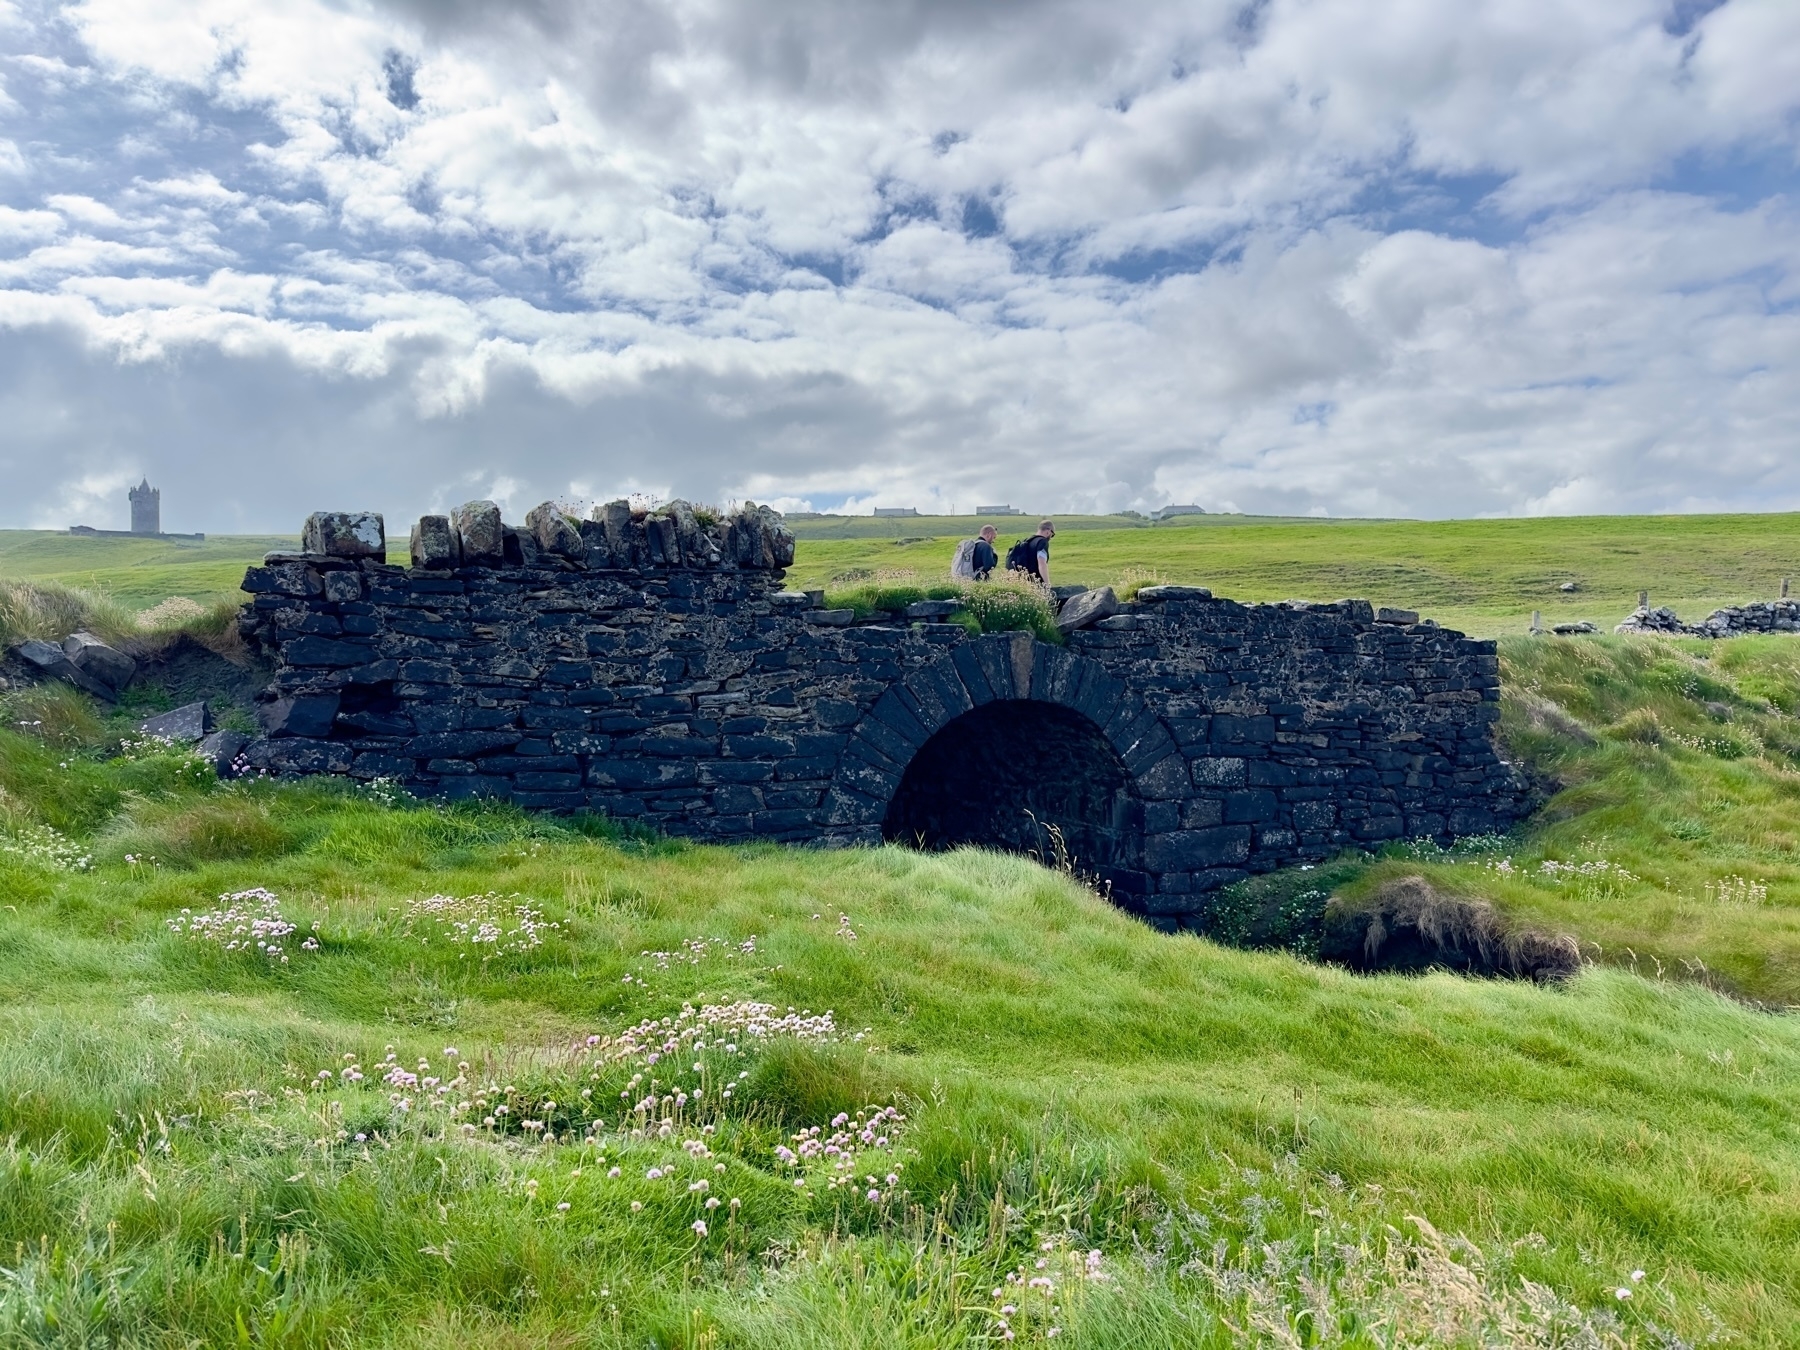 Auto-generated description: A stone bridge is surrounded by lush green grass and wildflowers under a partly cloudy sky, with a few people standing on it.